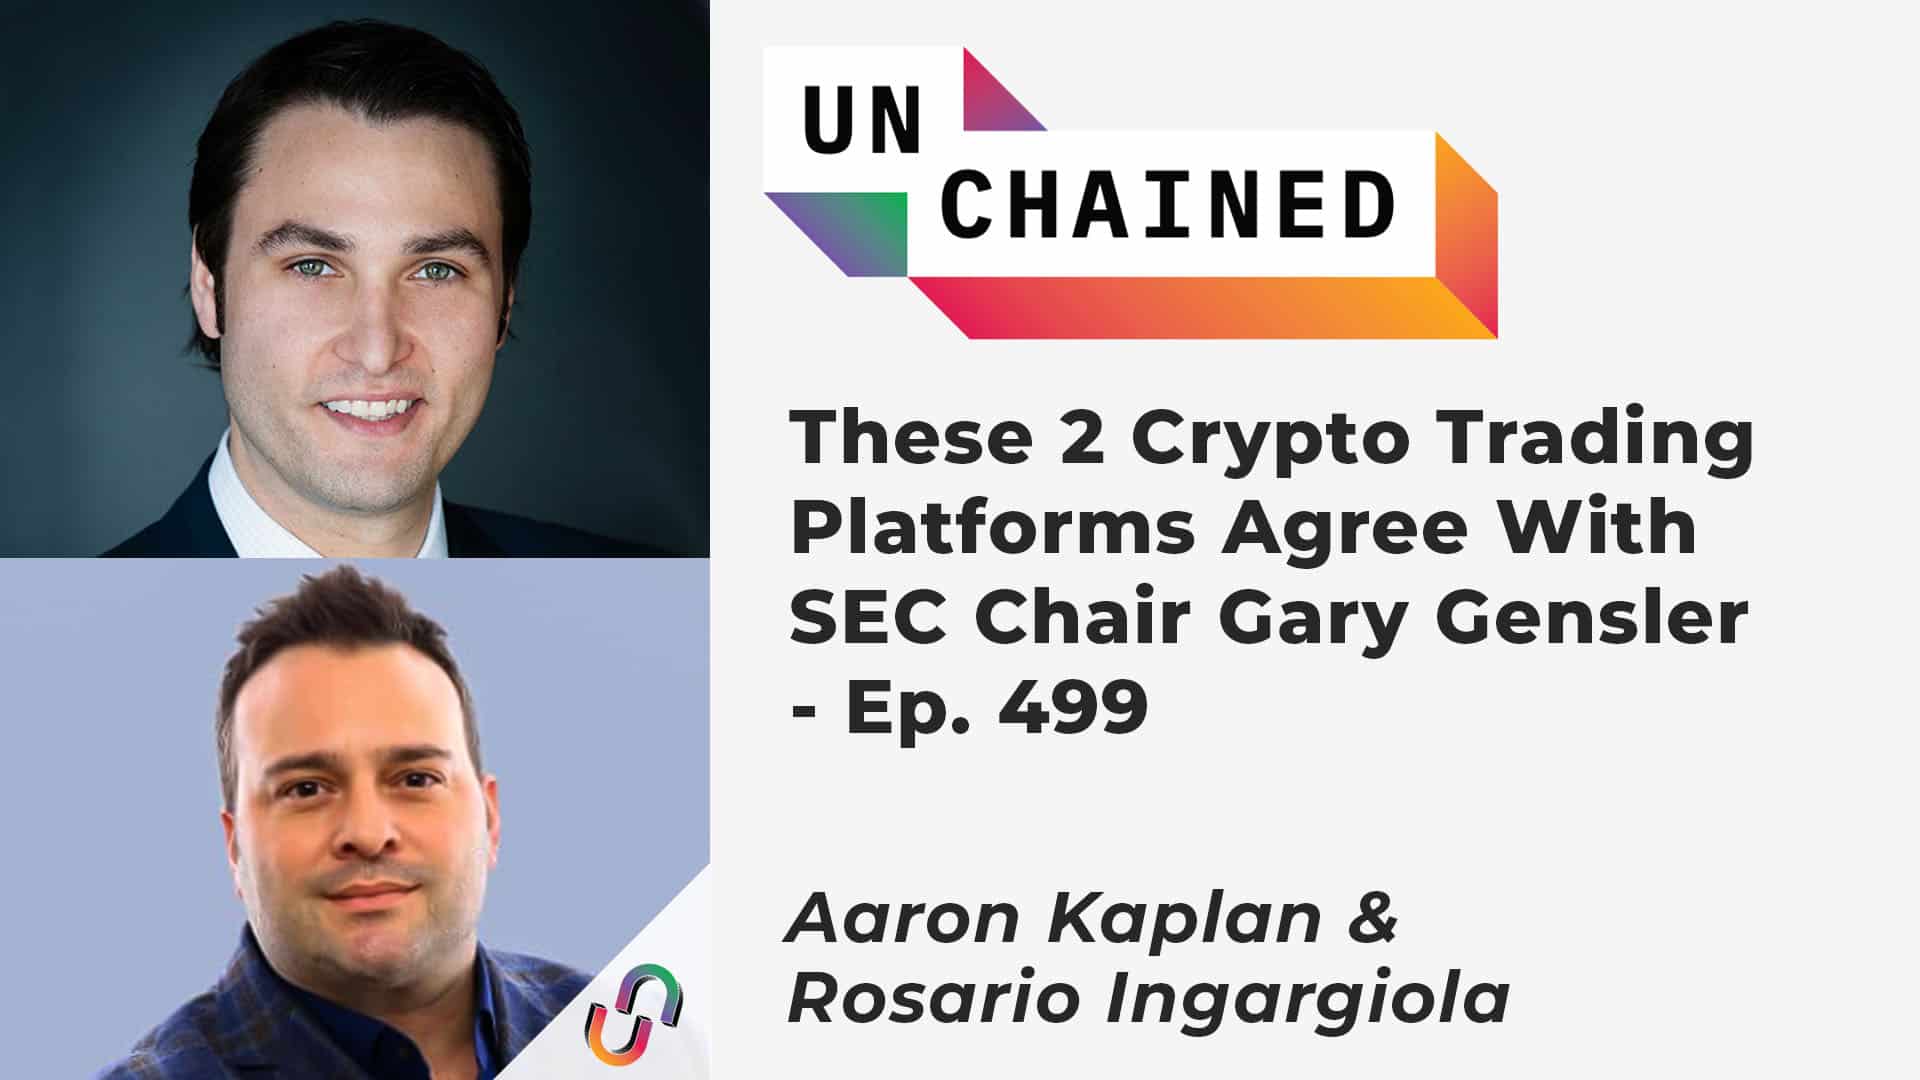 These 2 Crypto Trading Platforms Agree With SEC Chair Gary Gensler - Ep. 499